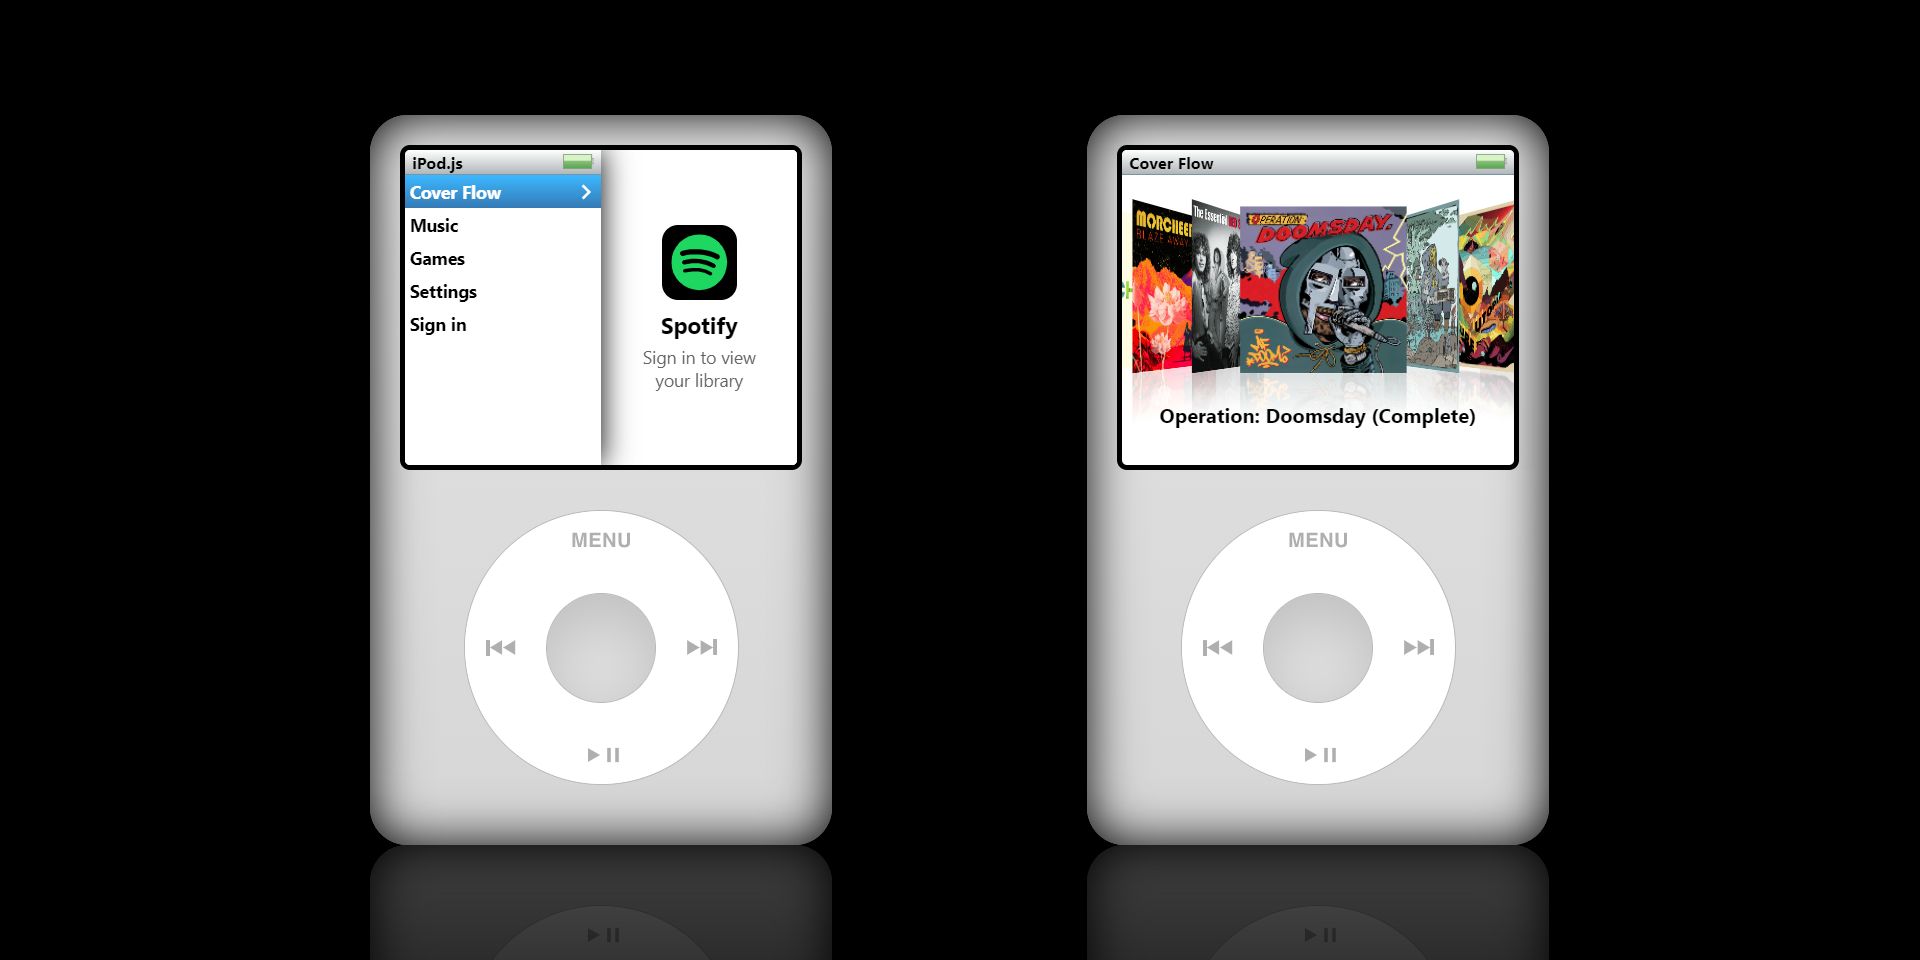 download the new version for ipod StartIsBack++ 3.6.10